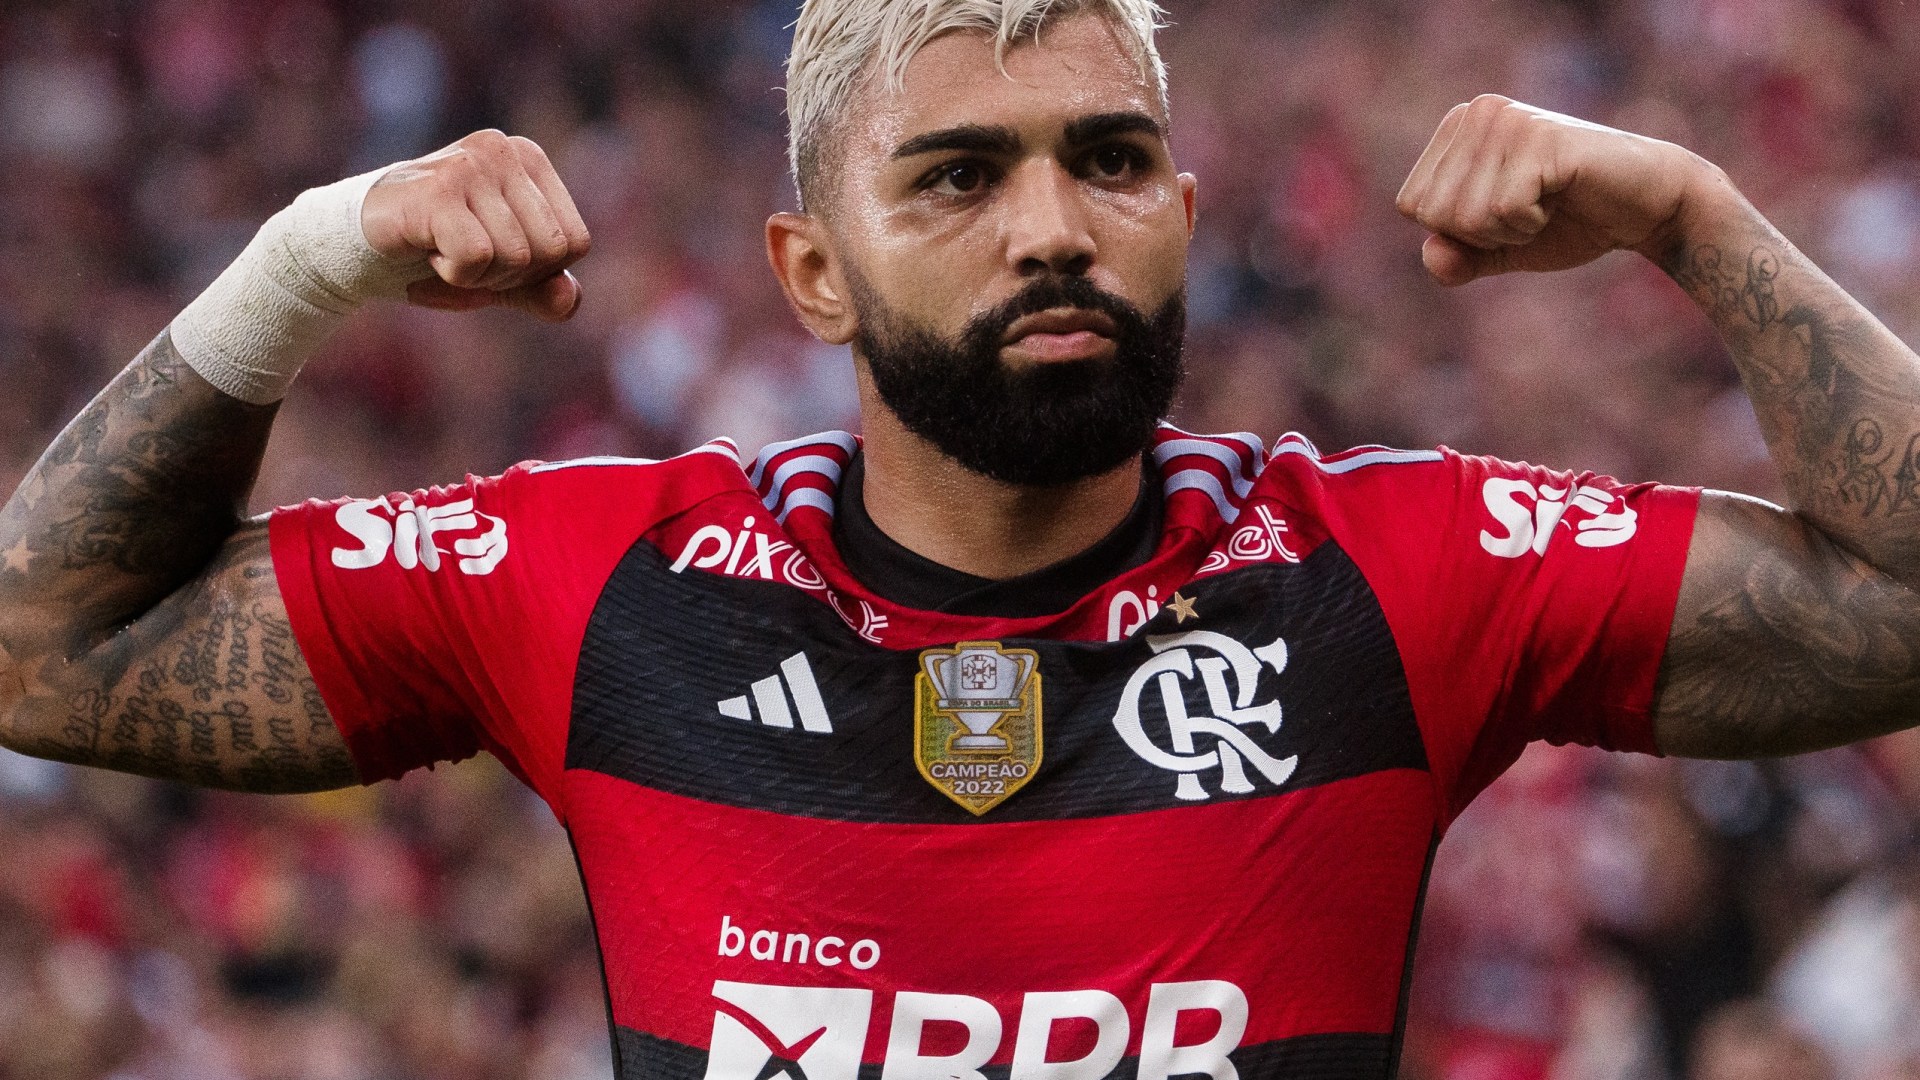 Brazilian Football Sensation Gabriel Barbosa Faces Two-Year Ban for Doping Fraud – Will He Win Appeal?